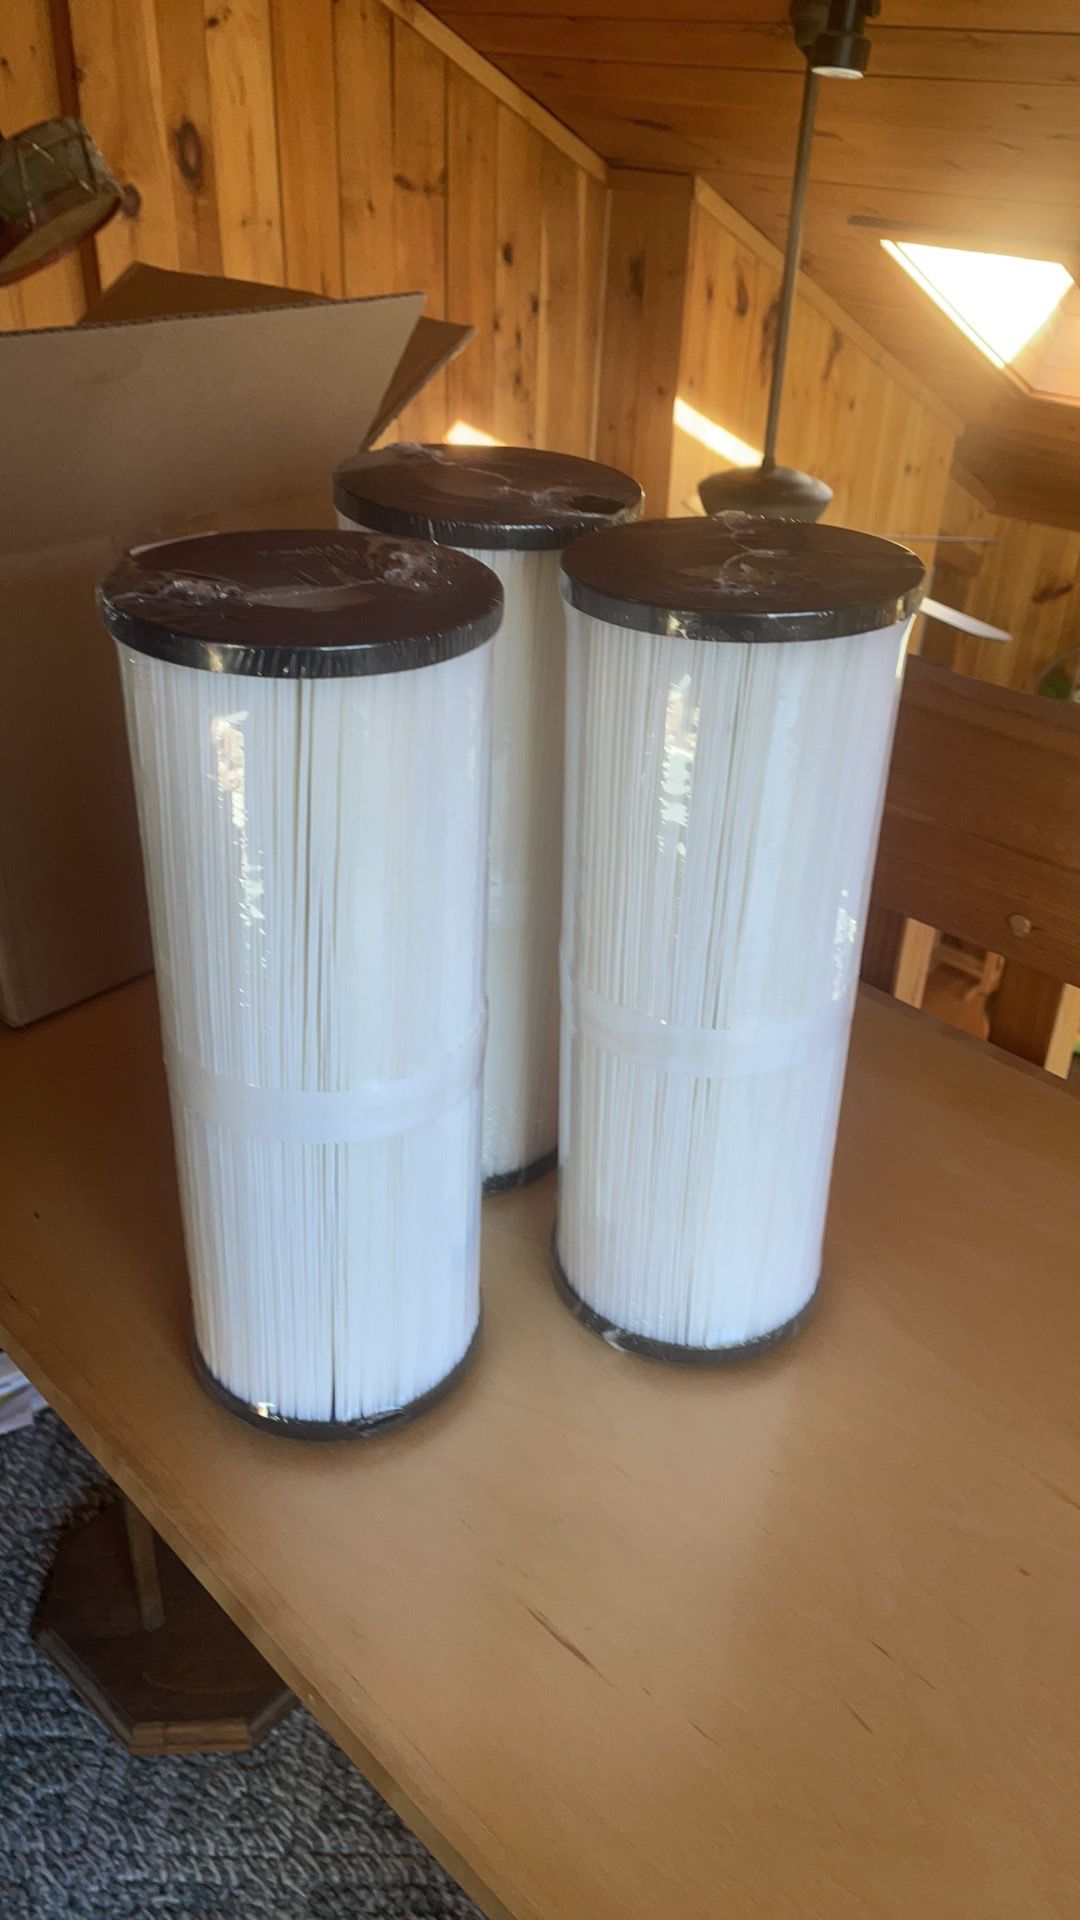 3 Jacuzzi/Hot tub Filters. Details in pictures. Co. sent me wrong ones. 